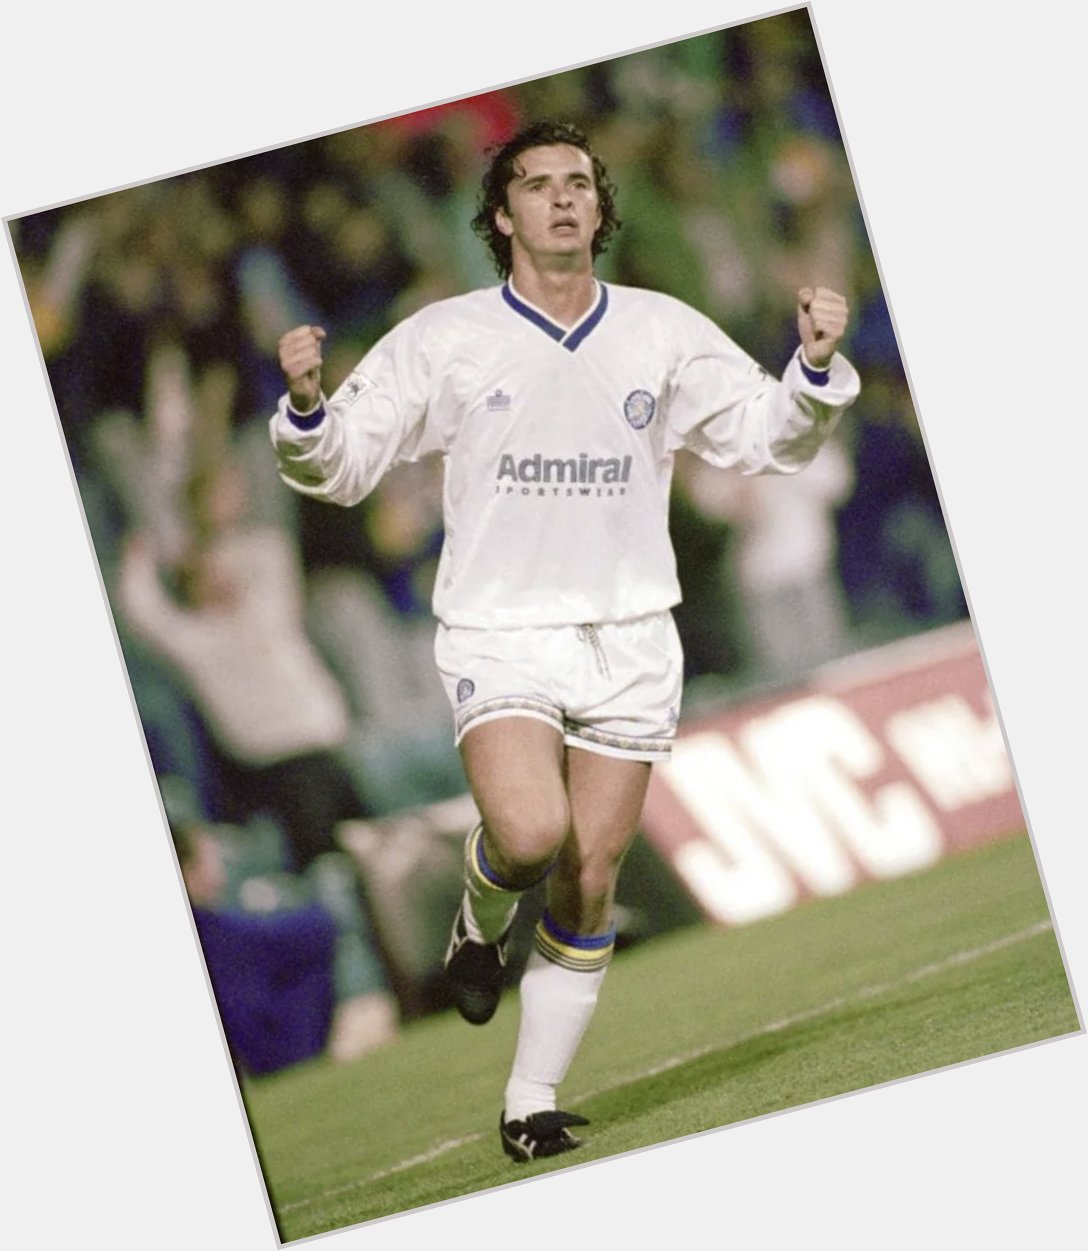 Happy birthday Gary Speed! Gone far too Soon and never will be forgotten! 